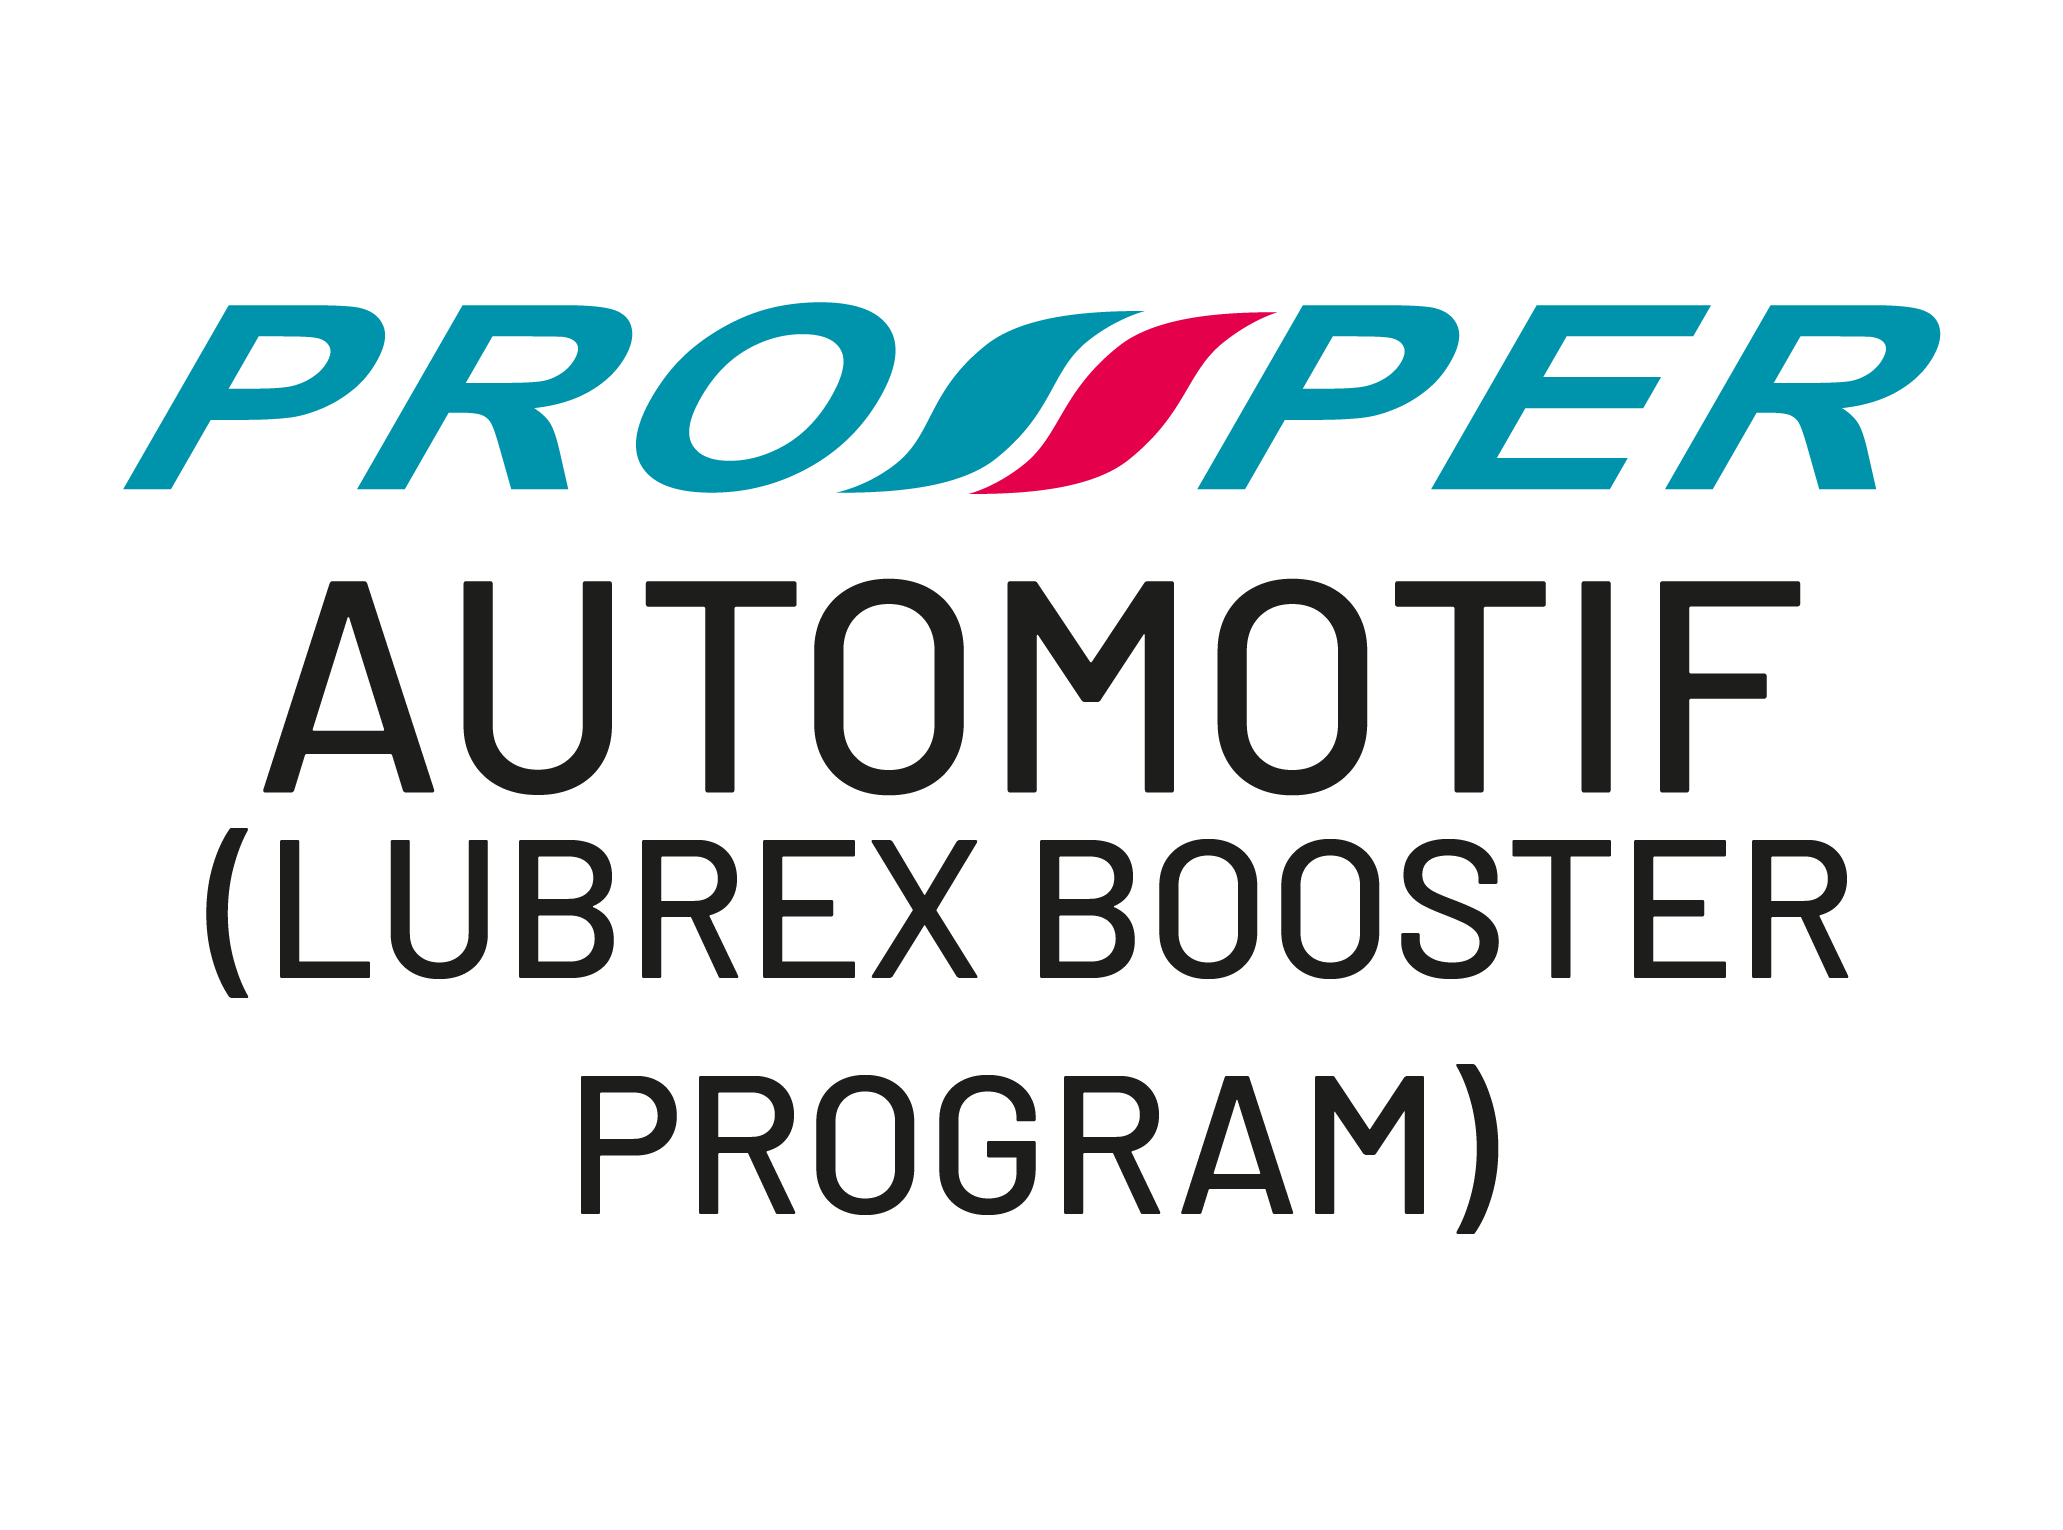 PROSPER Automotif - Lubrex Booster Program is a collaborative effort between PUNB and Prowheels Distributor (M) Sdn Bhd (PDMSB) aimed to foster the growth of PDMSB’s Lubrex oil distributor business. Under the program, Lubrex oil distributor entrepreneurs appointed by PDMSB will receive business financing from PUNB. PDMSB provides comprehensive services including corporate image and business monitoring, entrepreneurship training and advisory support.